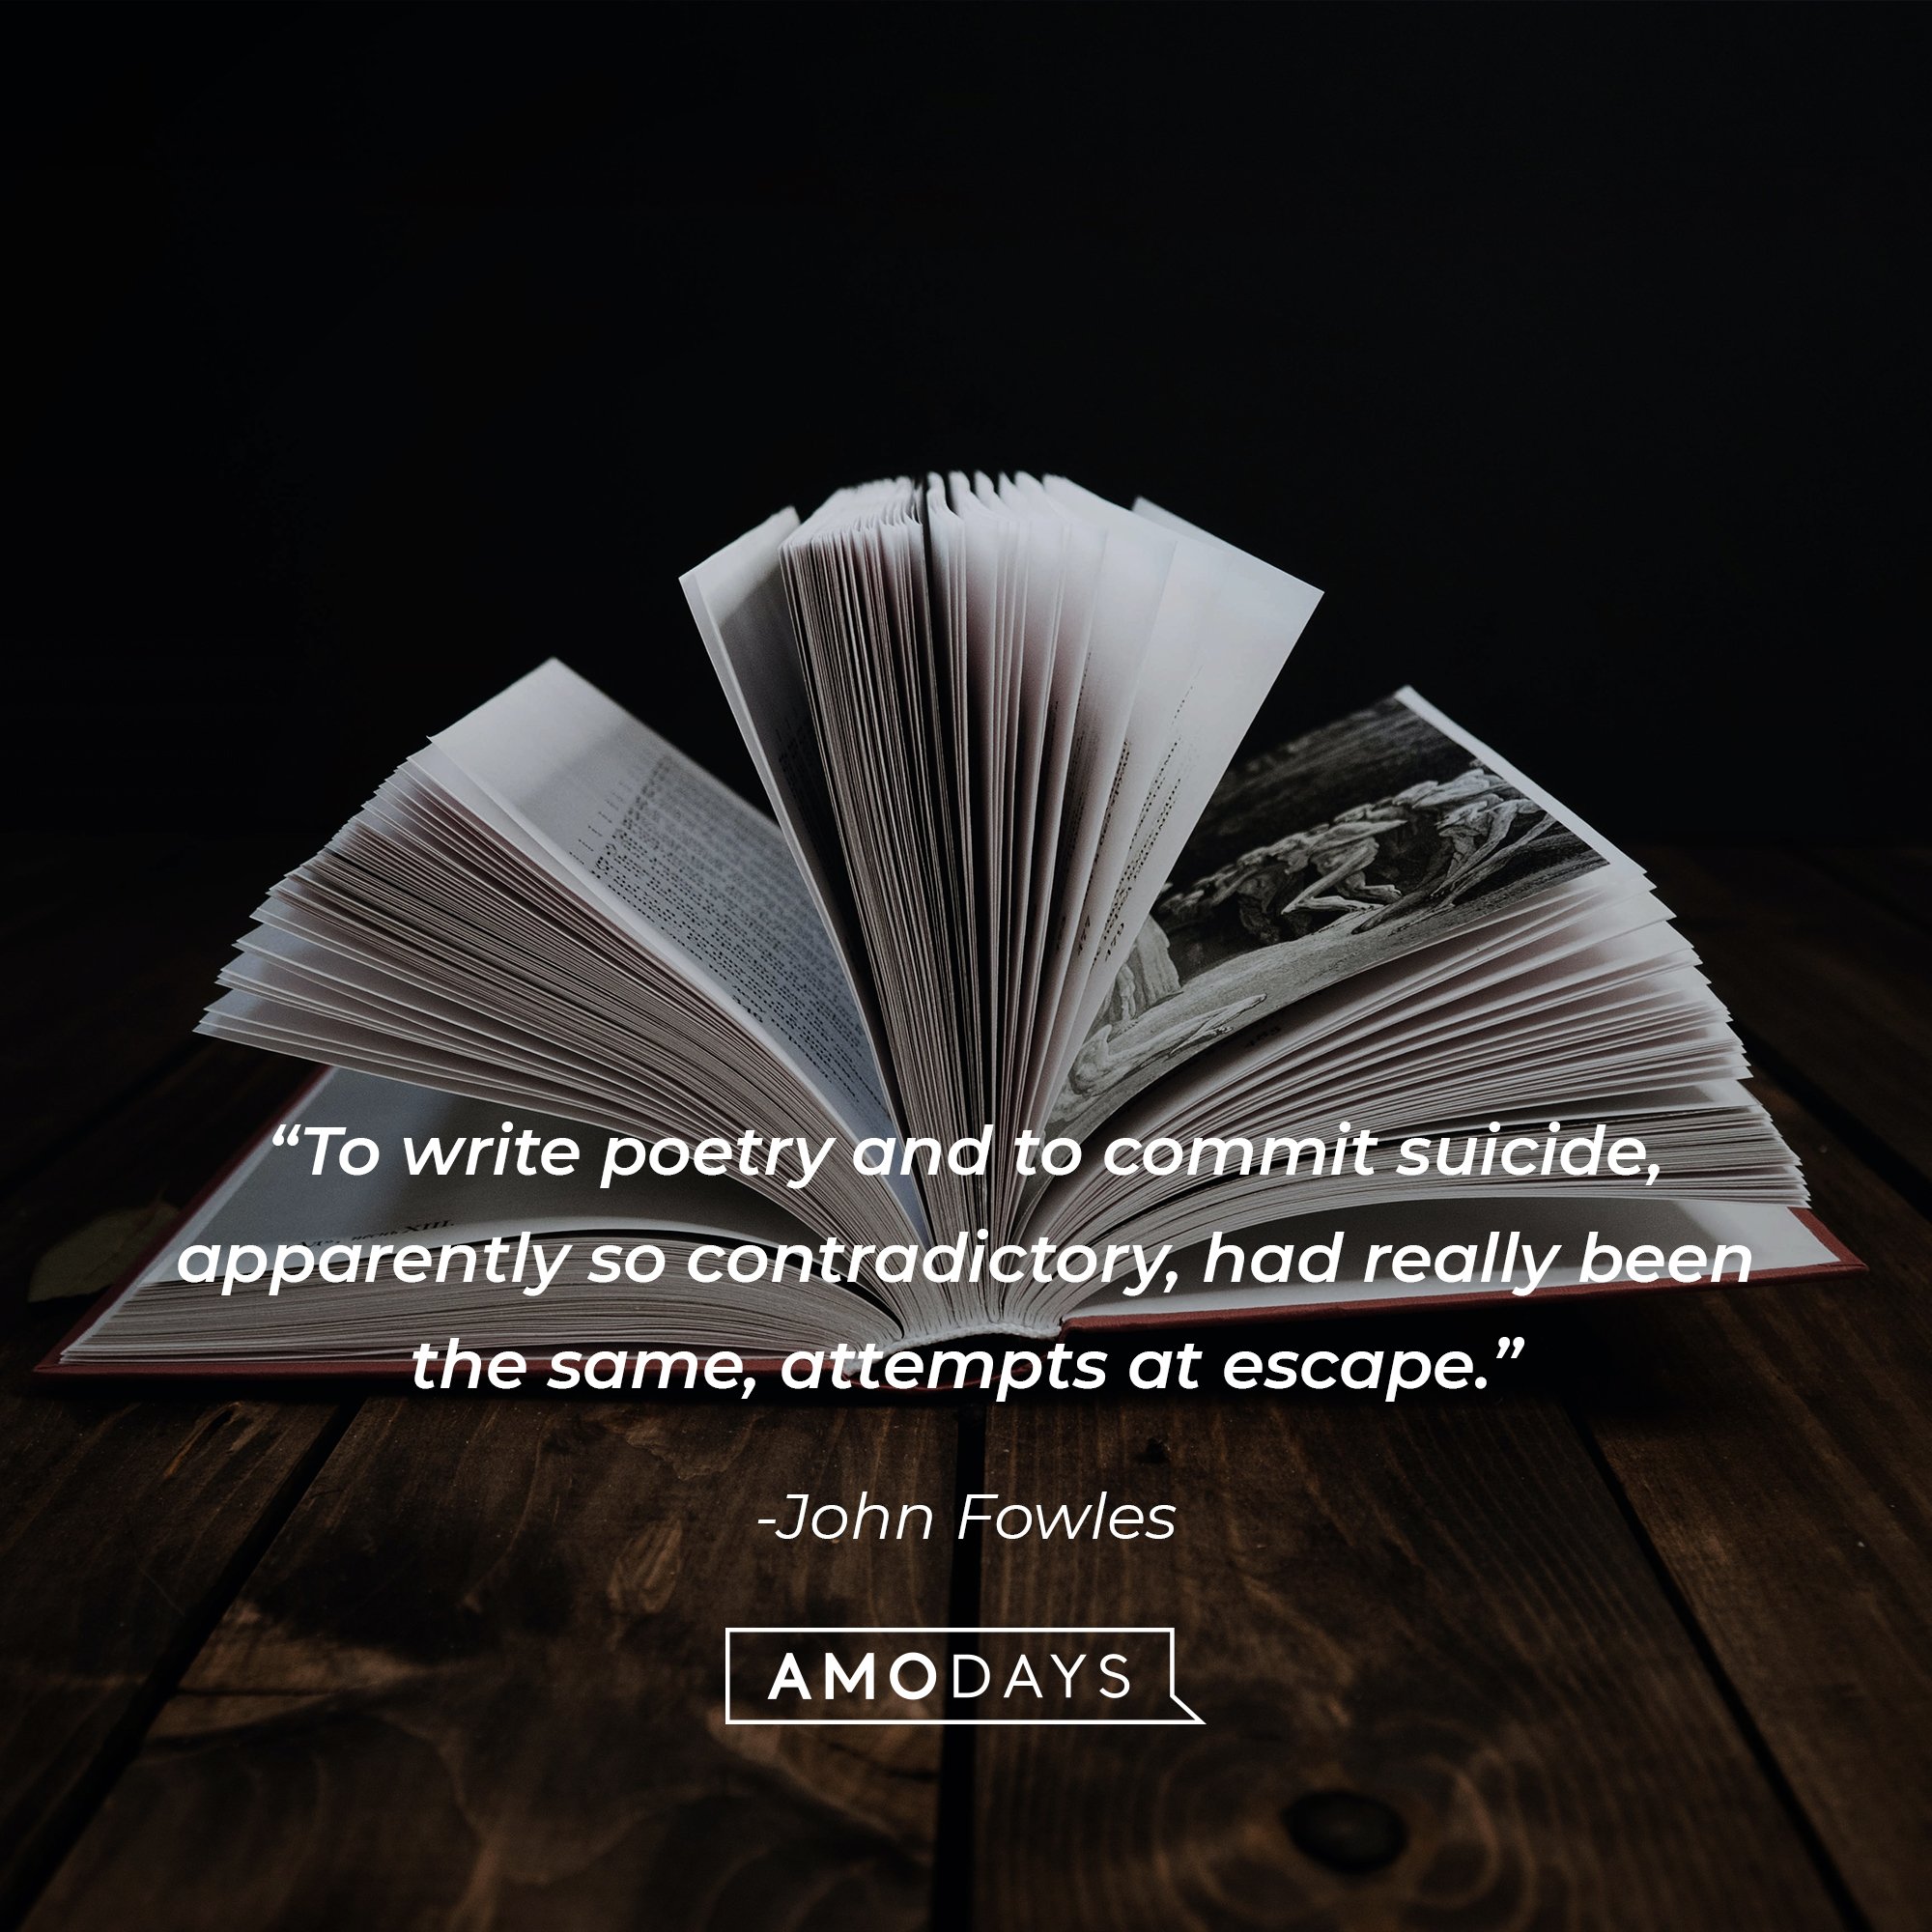 John Fowles's quote:  “To write poetry and to commit suicide, apparently so contradictory, had really been the same, attempts at escape.” | Image: AmoDays